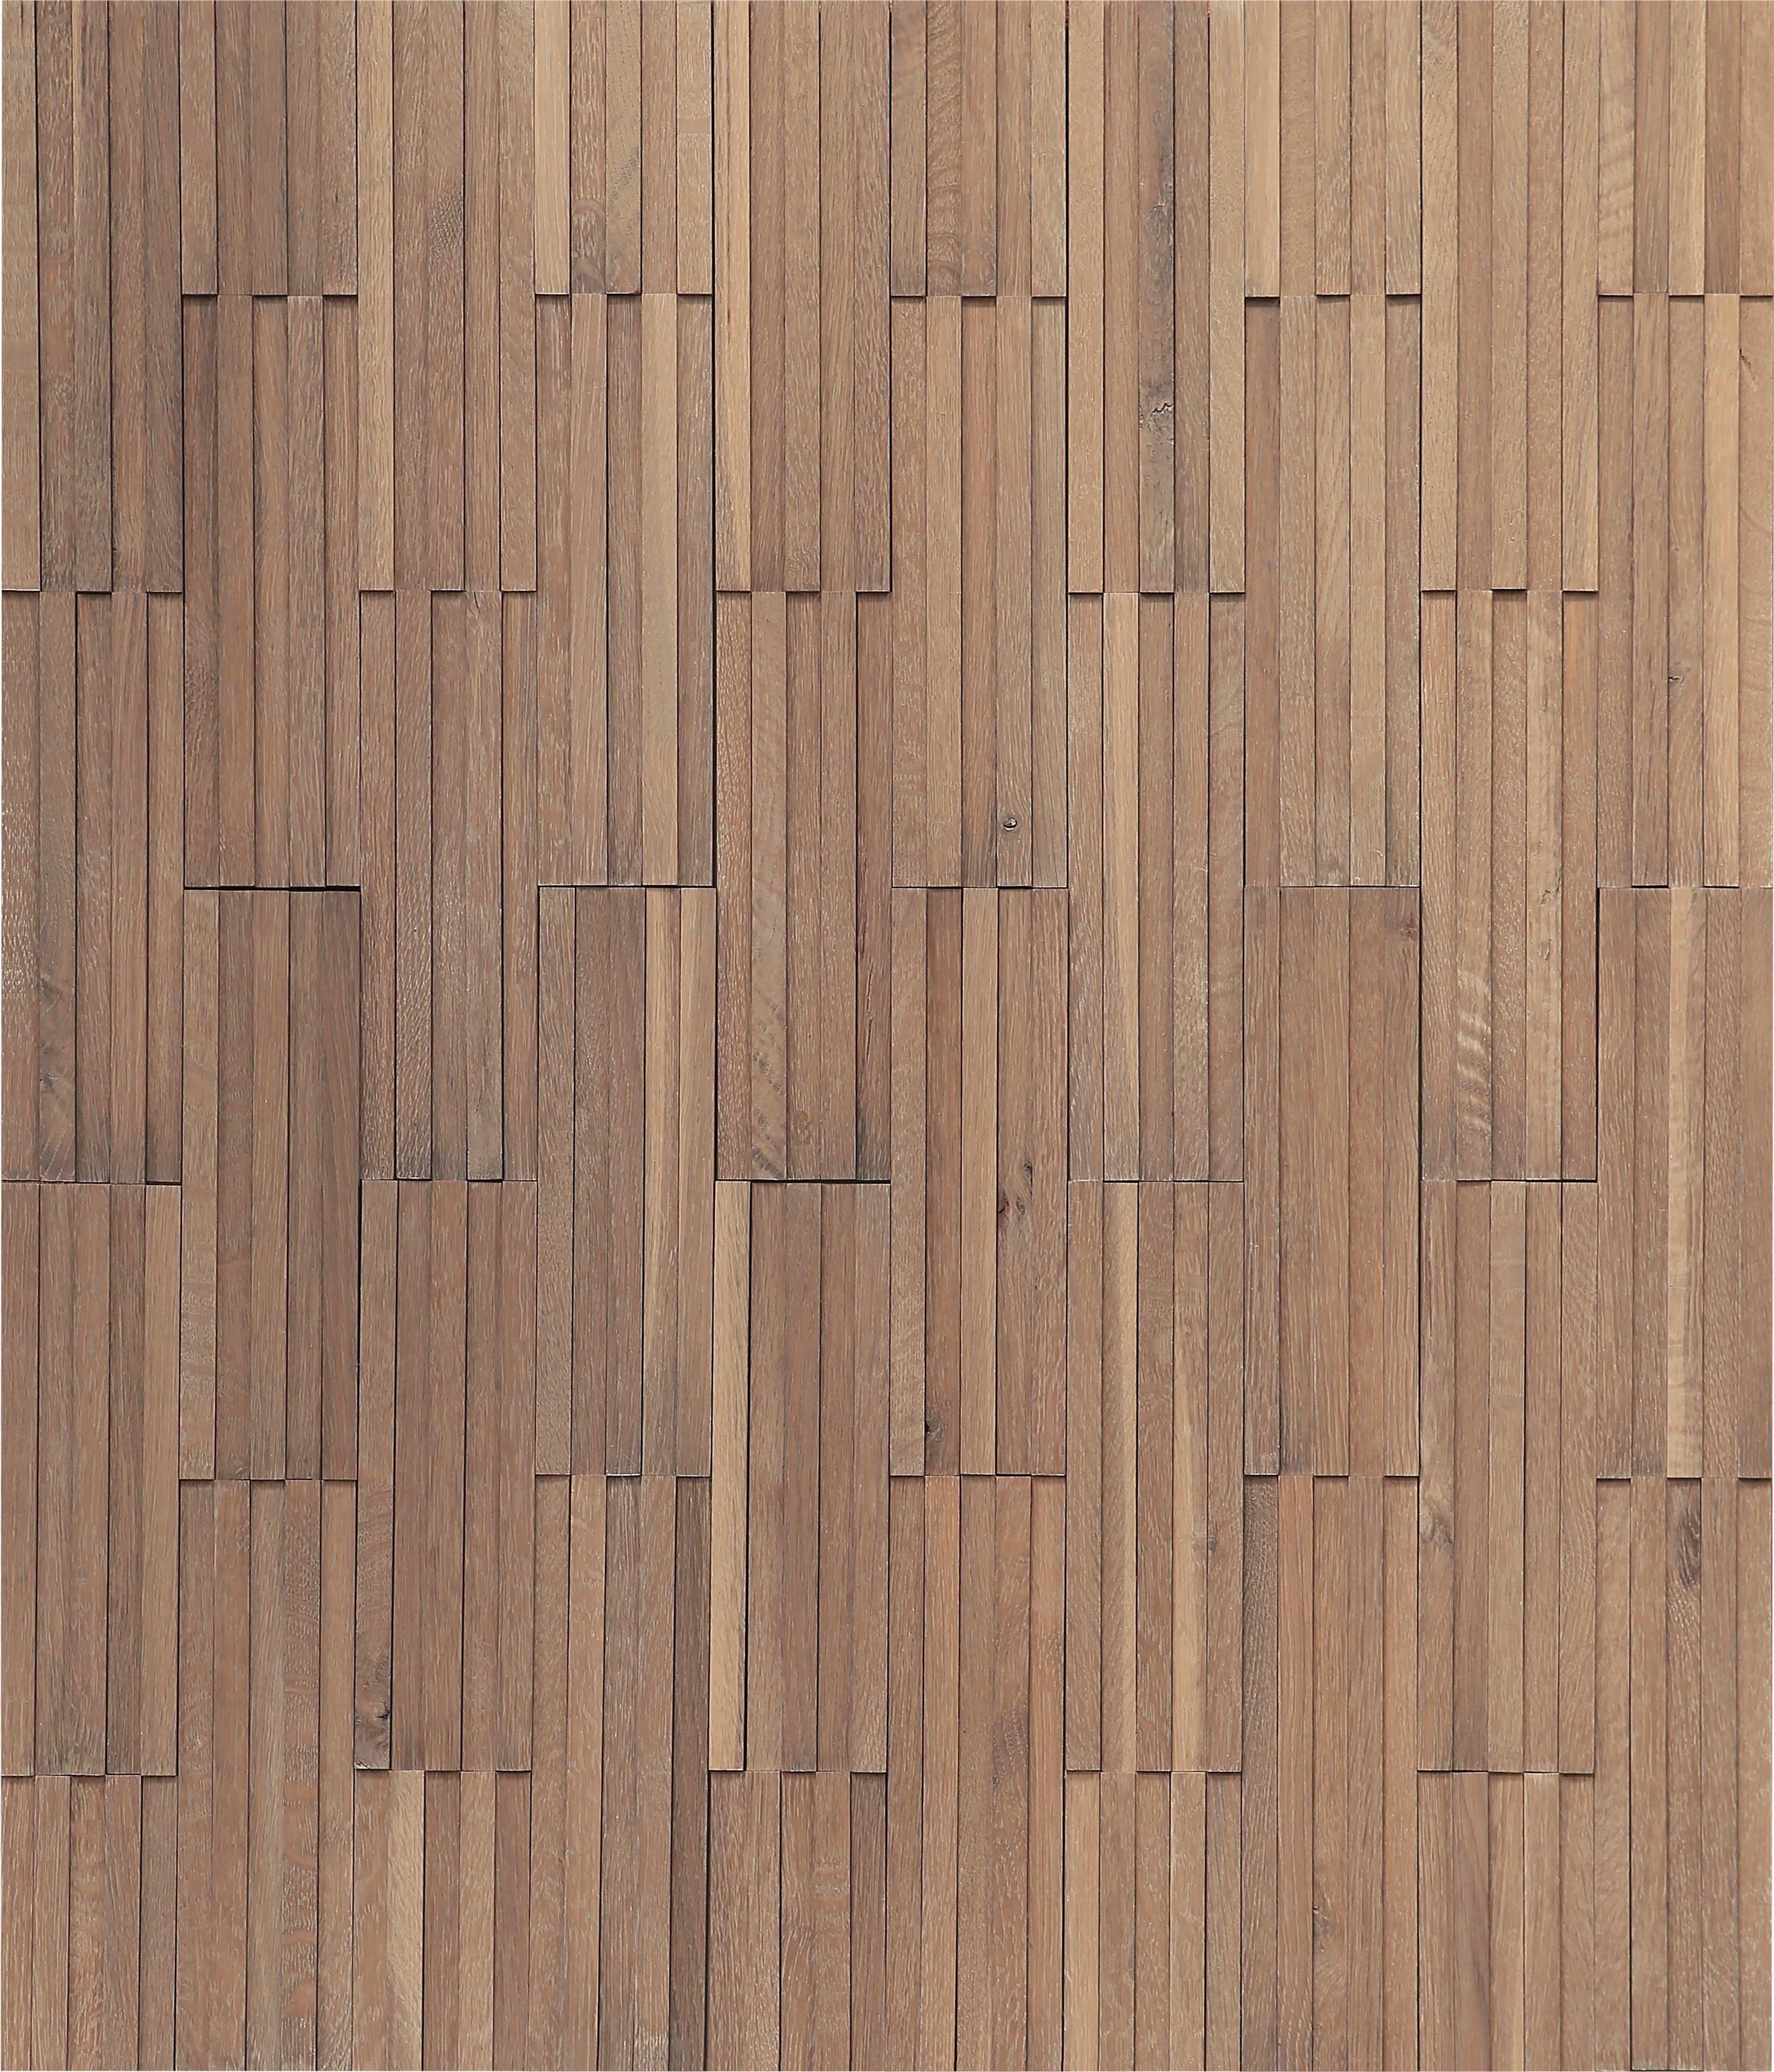 duchateau inceptiv parallels lugano oak three dimensional wall natural wood panel matte lacquer for interior use distributed by surface group international